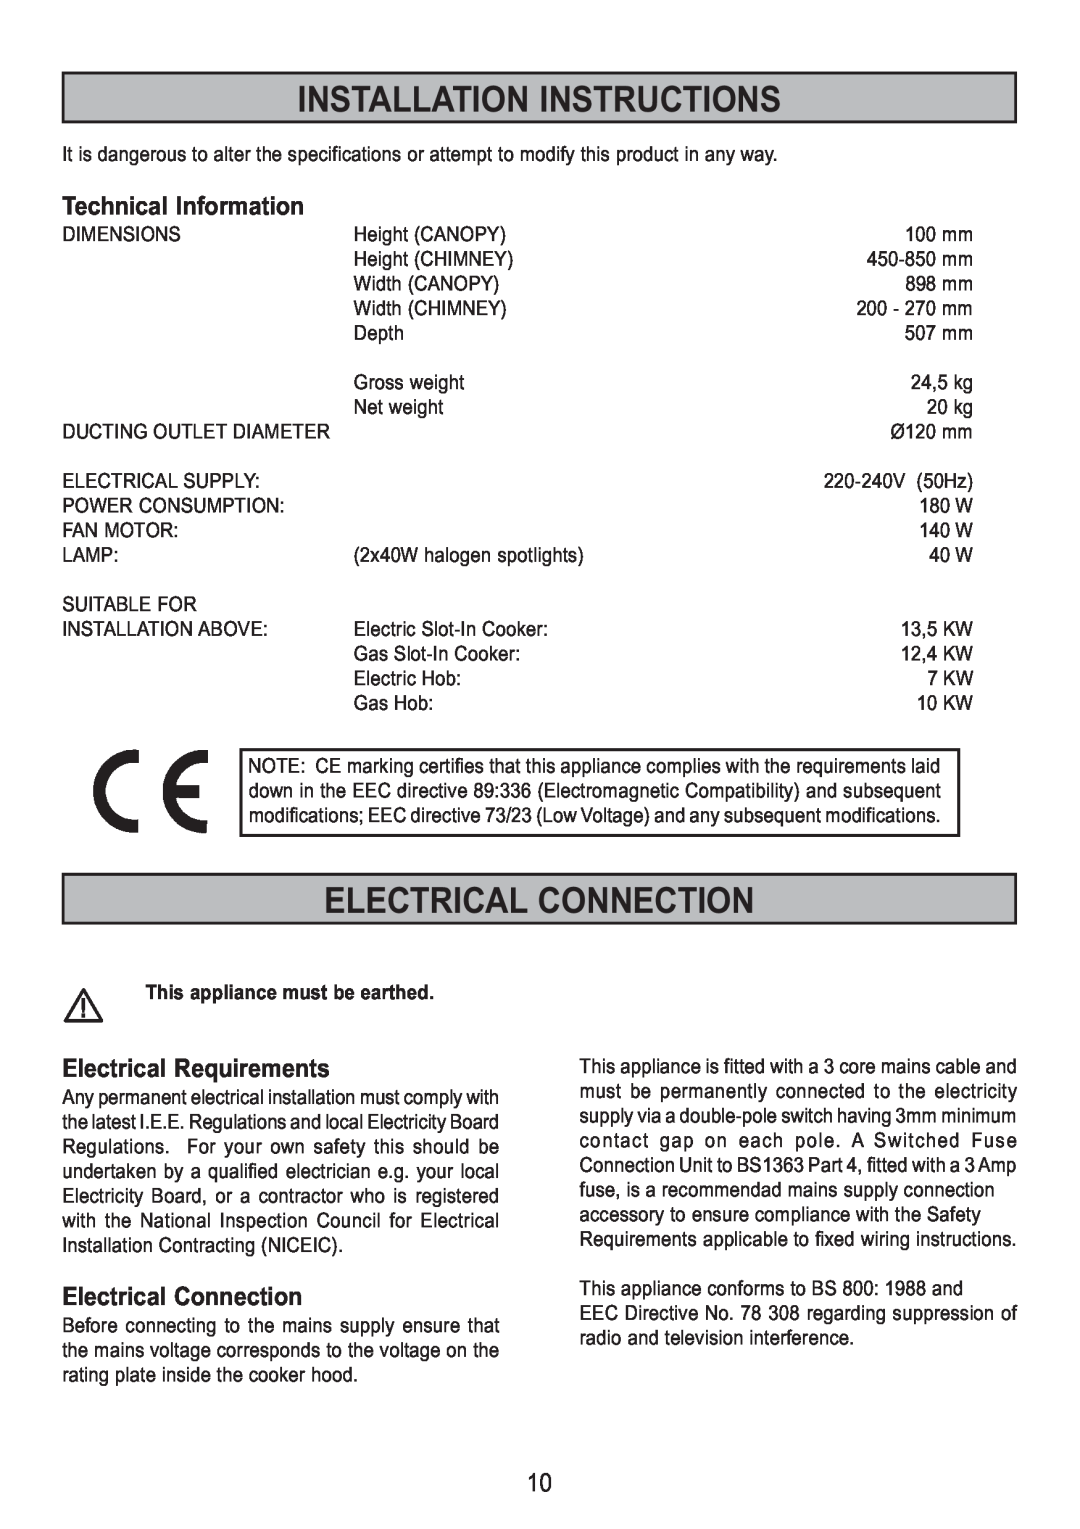 Zanussi ZHC 95 ALU manual Installation Instructions, Electrical Connection, Technical Information, Electrical Requirements 